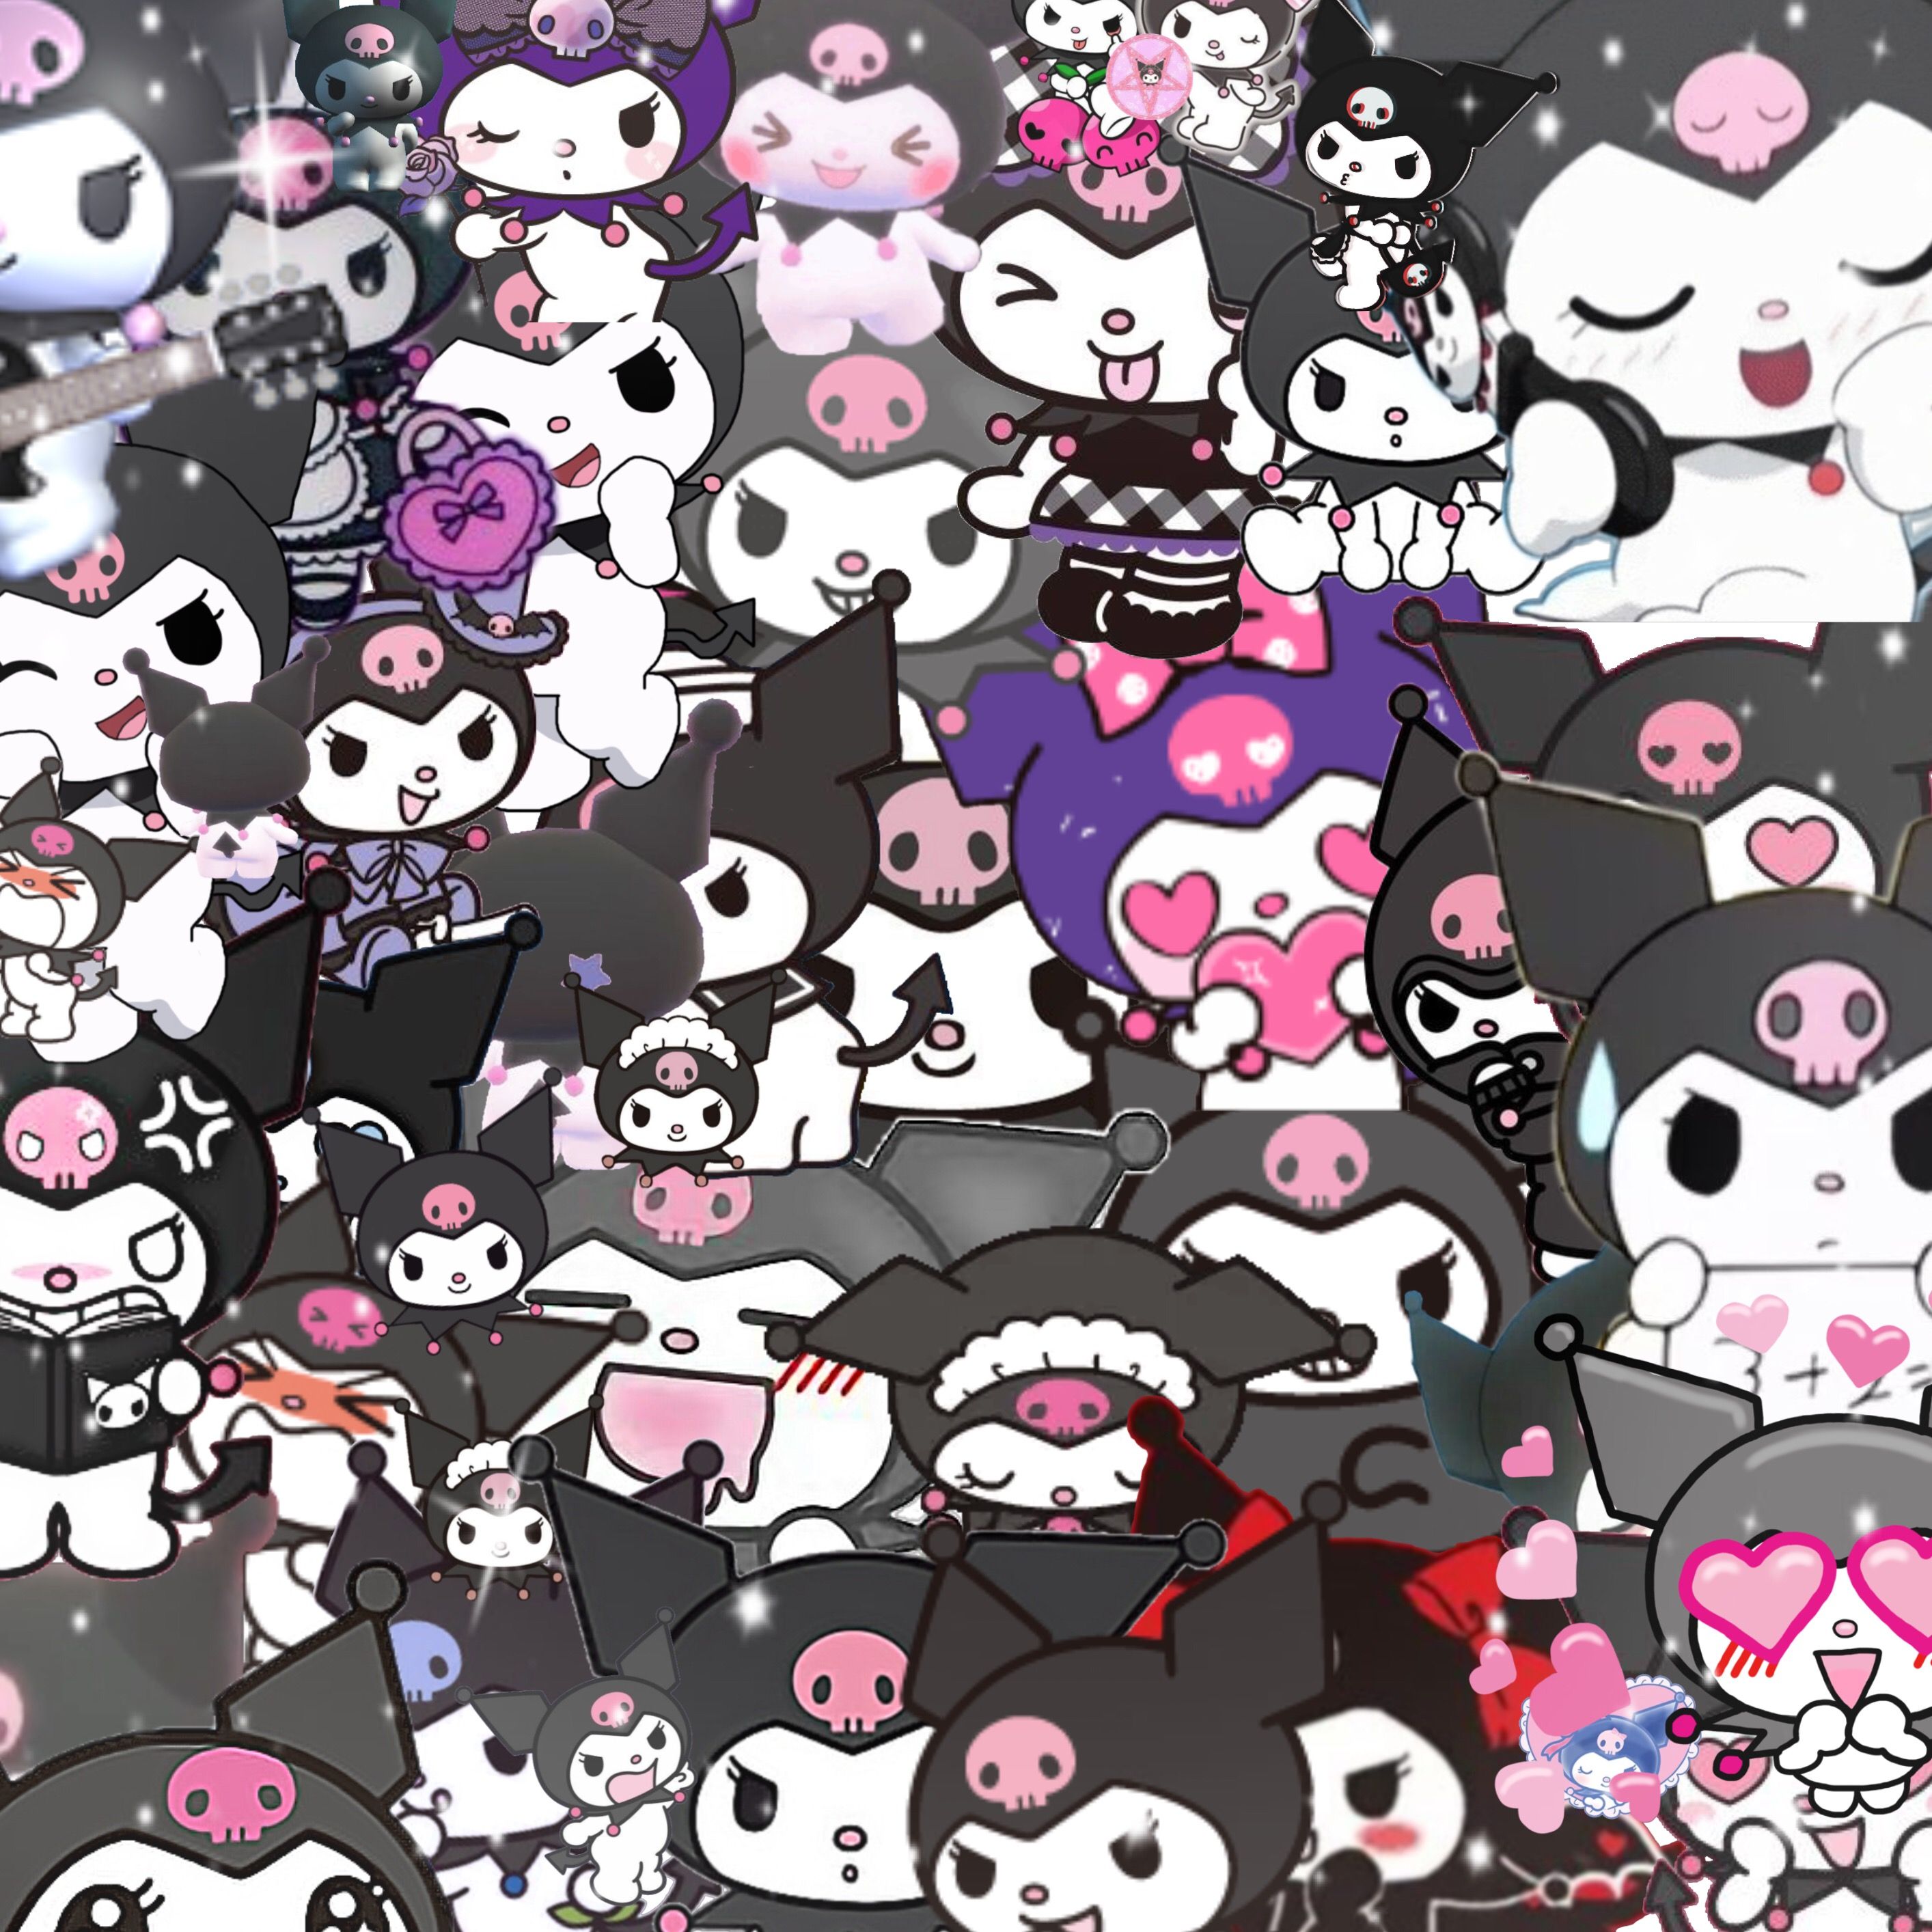 Sanrio characters, such as My Melody and Kuromi, are shown in a pile of images. - Kuromi, animecore